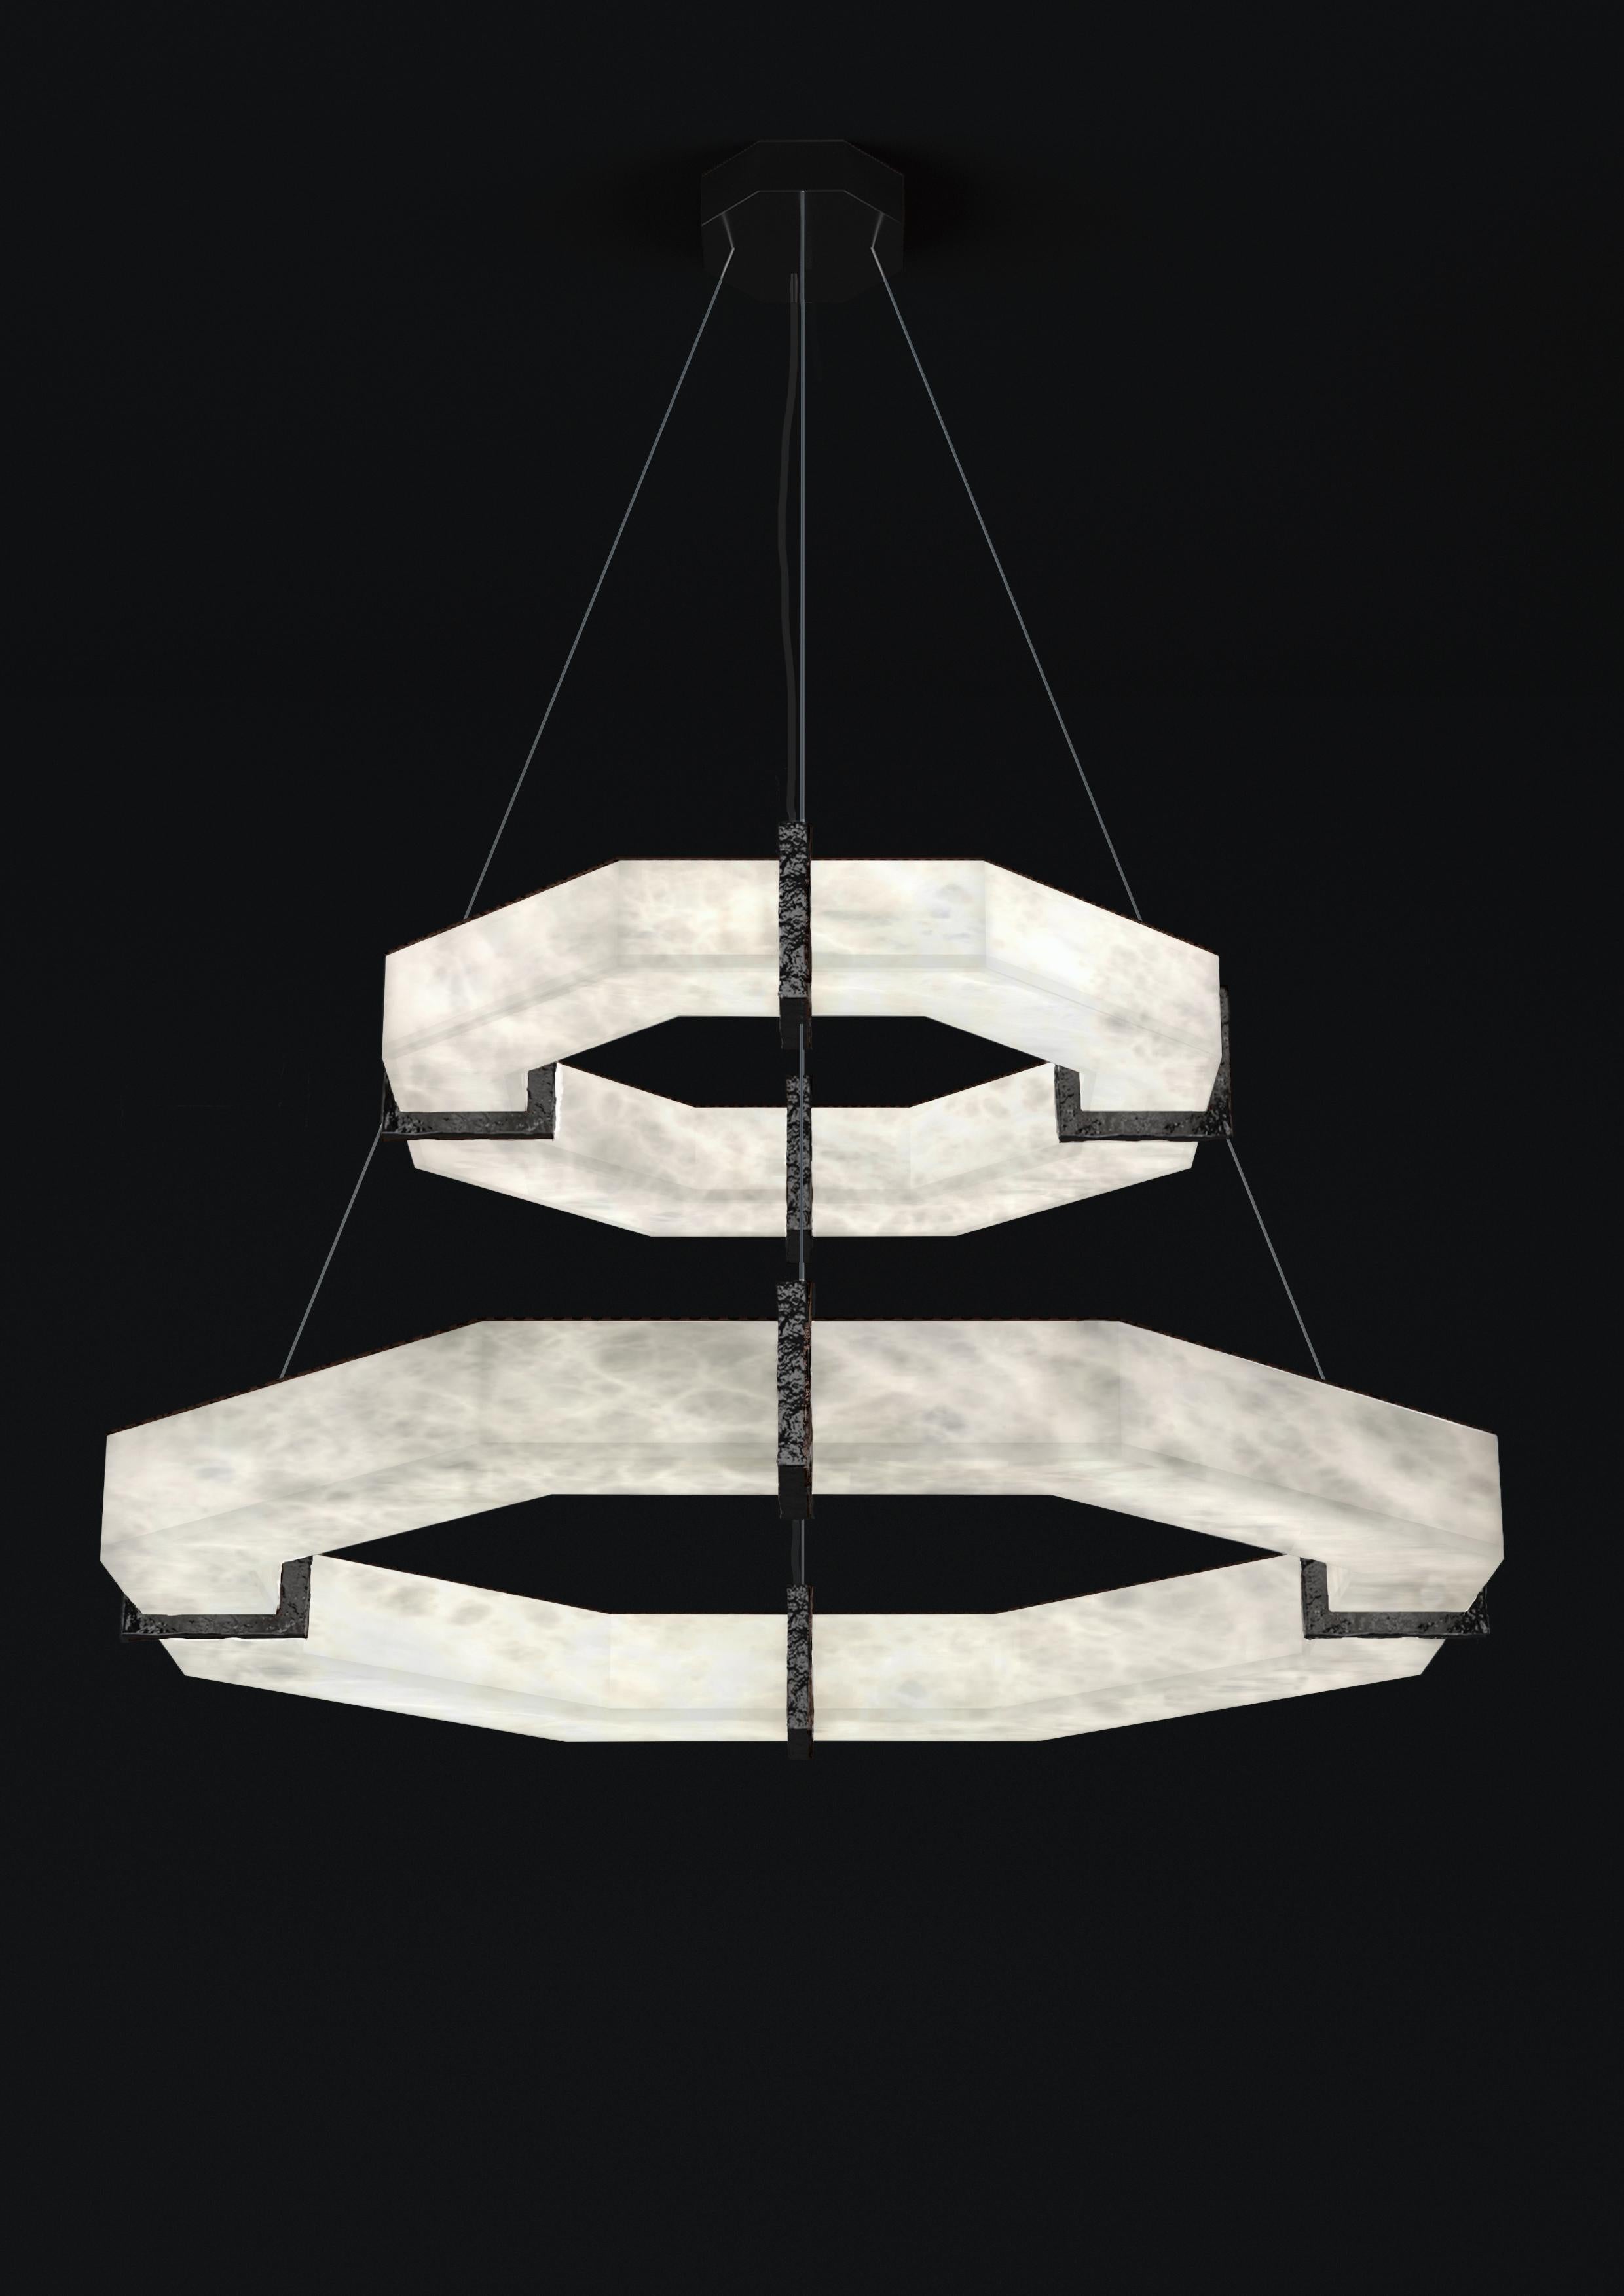 Efesto Shiny Black Metal Double Pendant Lamp by Alabastro Italiano
Dimensions: D 80.5 x W 80.5 x H 36.5 cm.
Materials: White alabaster and metal.

Available in different finishes: Shiny Silver, Bronze, Brushed Brass, Ruggine of Florence, Brushed